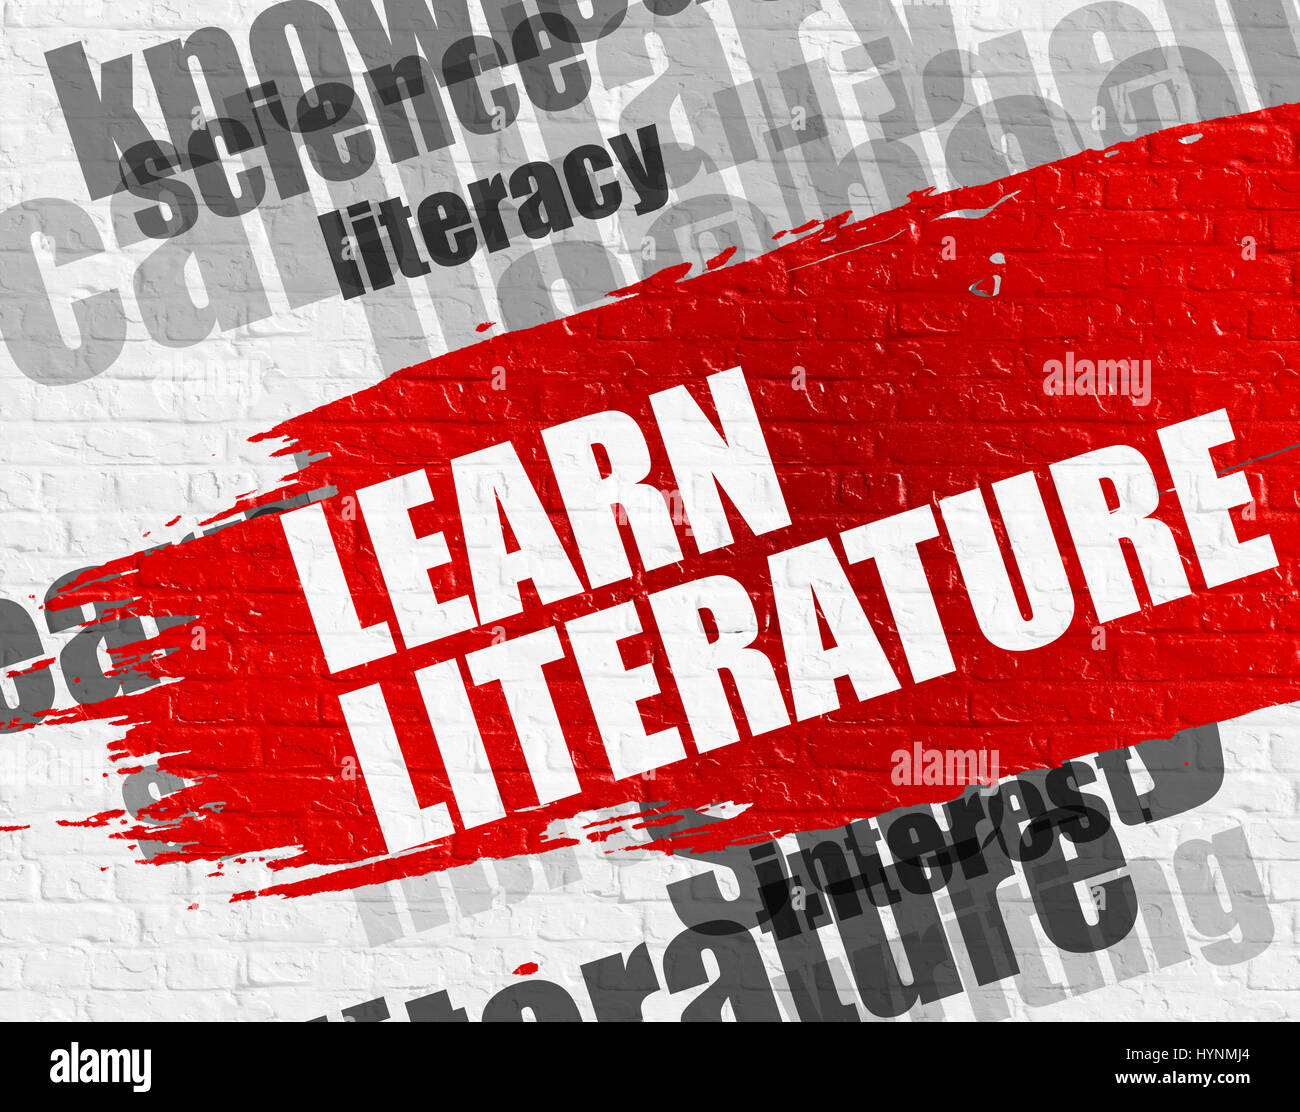 Learn Literature on the Brickwall. Stock Photo